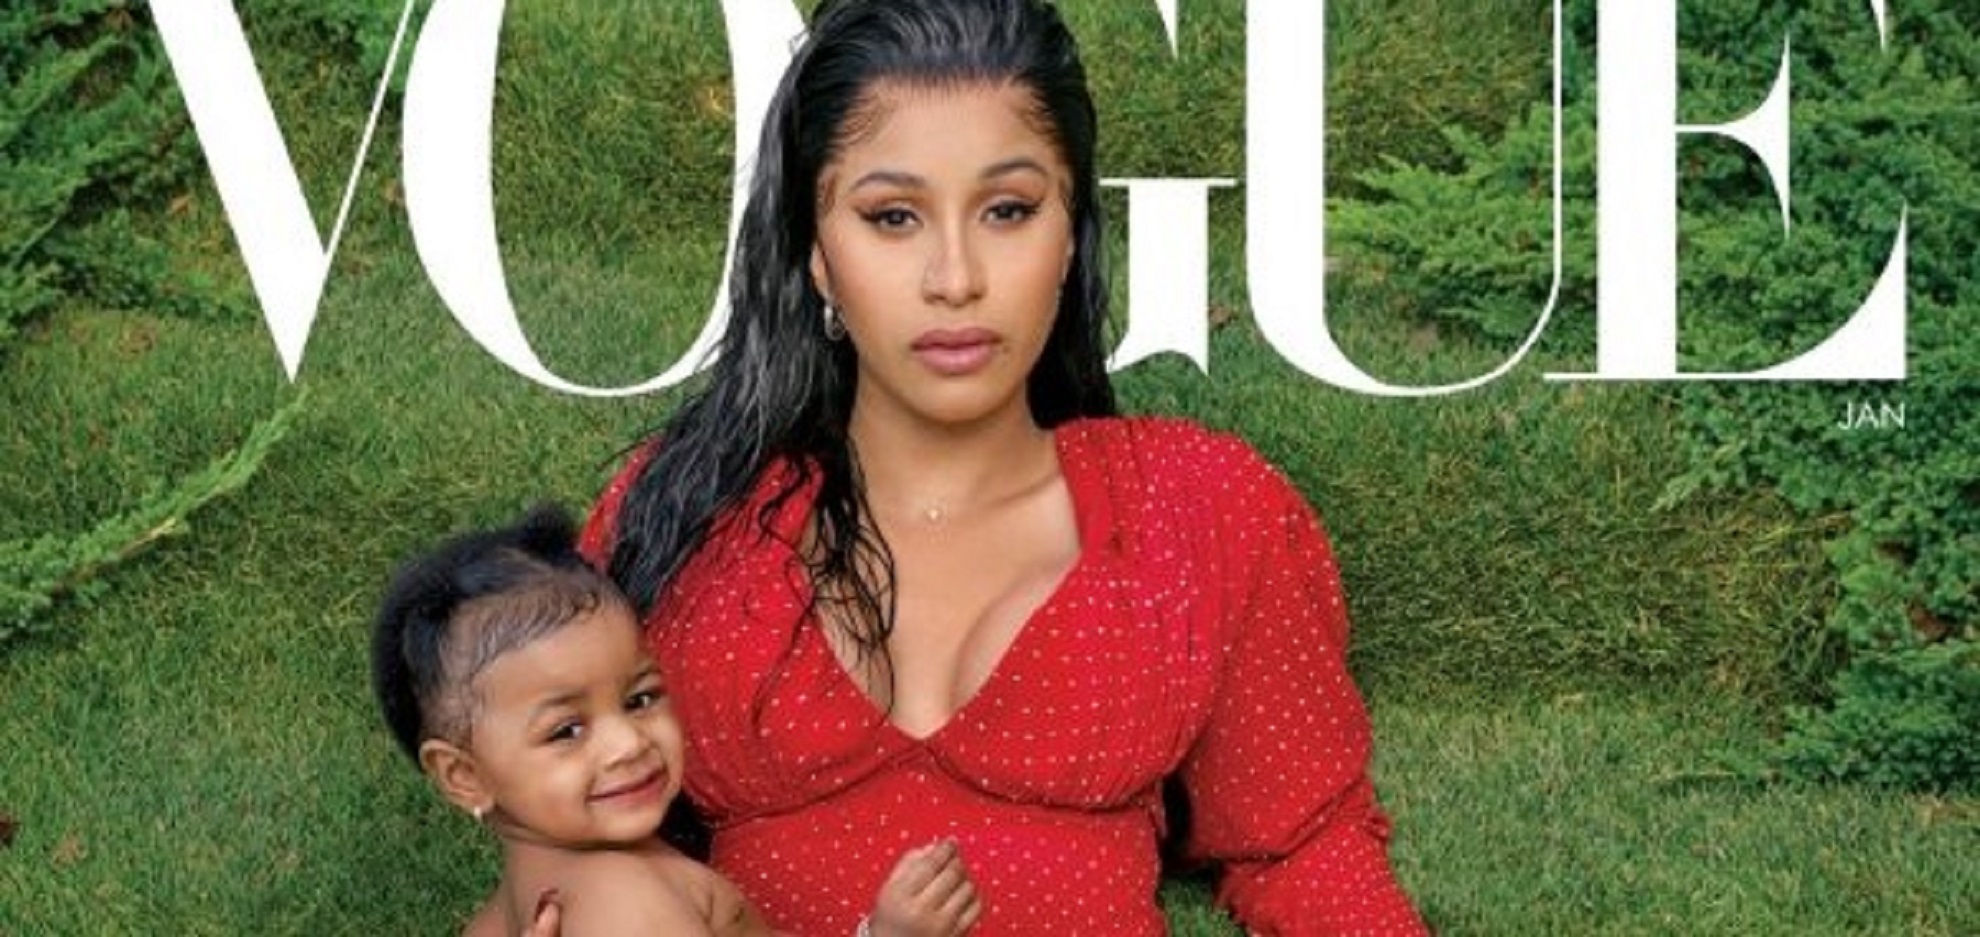 Cardi B: “I could be the most ratchet-est person ever, but I’m still a great mom”